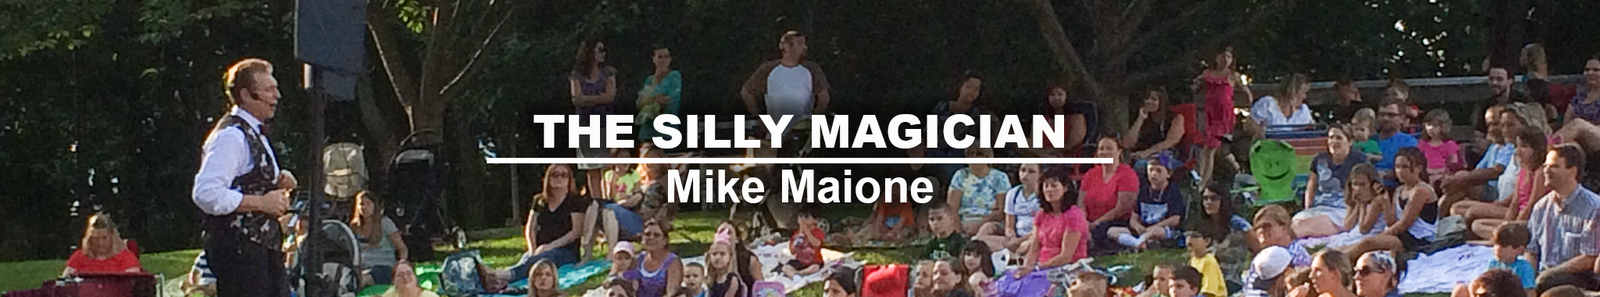 Mike Maione, The Silly Magician performing magic show for families in Port Jefferson